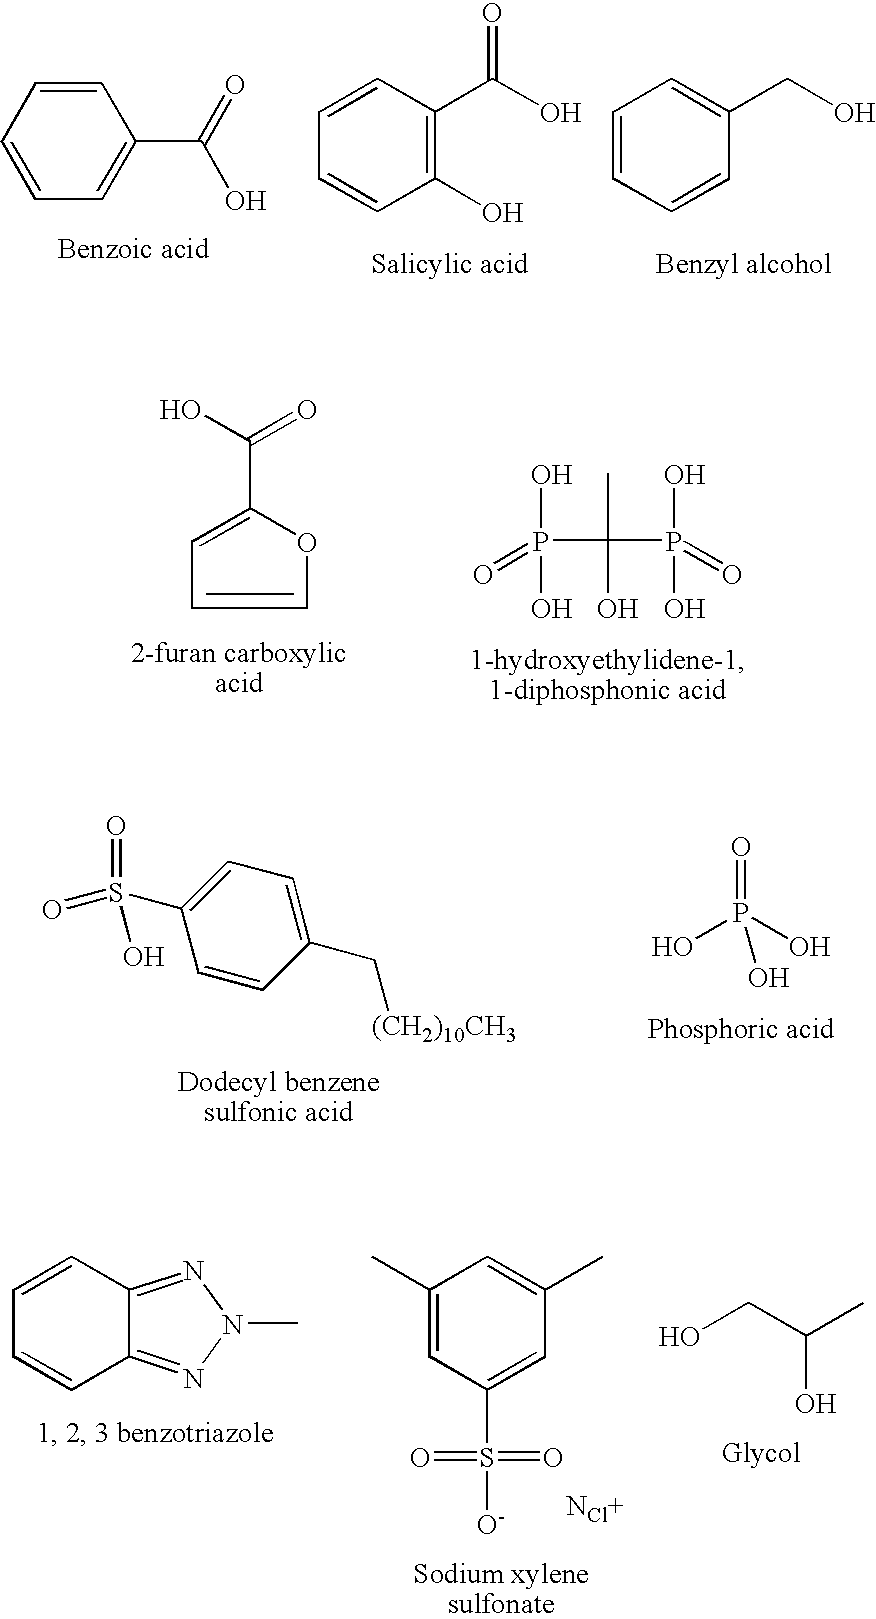 Hydrogen peroxide disinfectant containing a cyclic carboxylic acid and/or aromatic alcohol